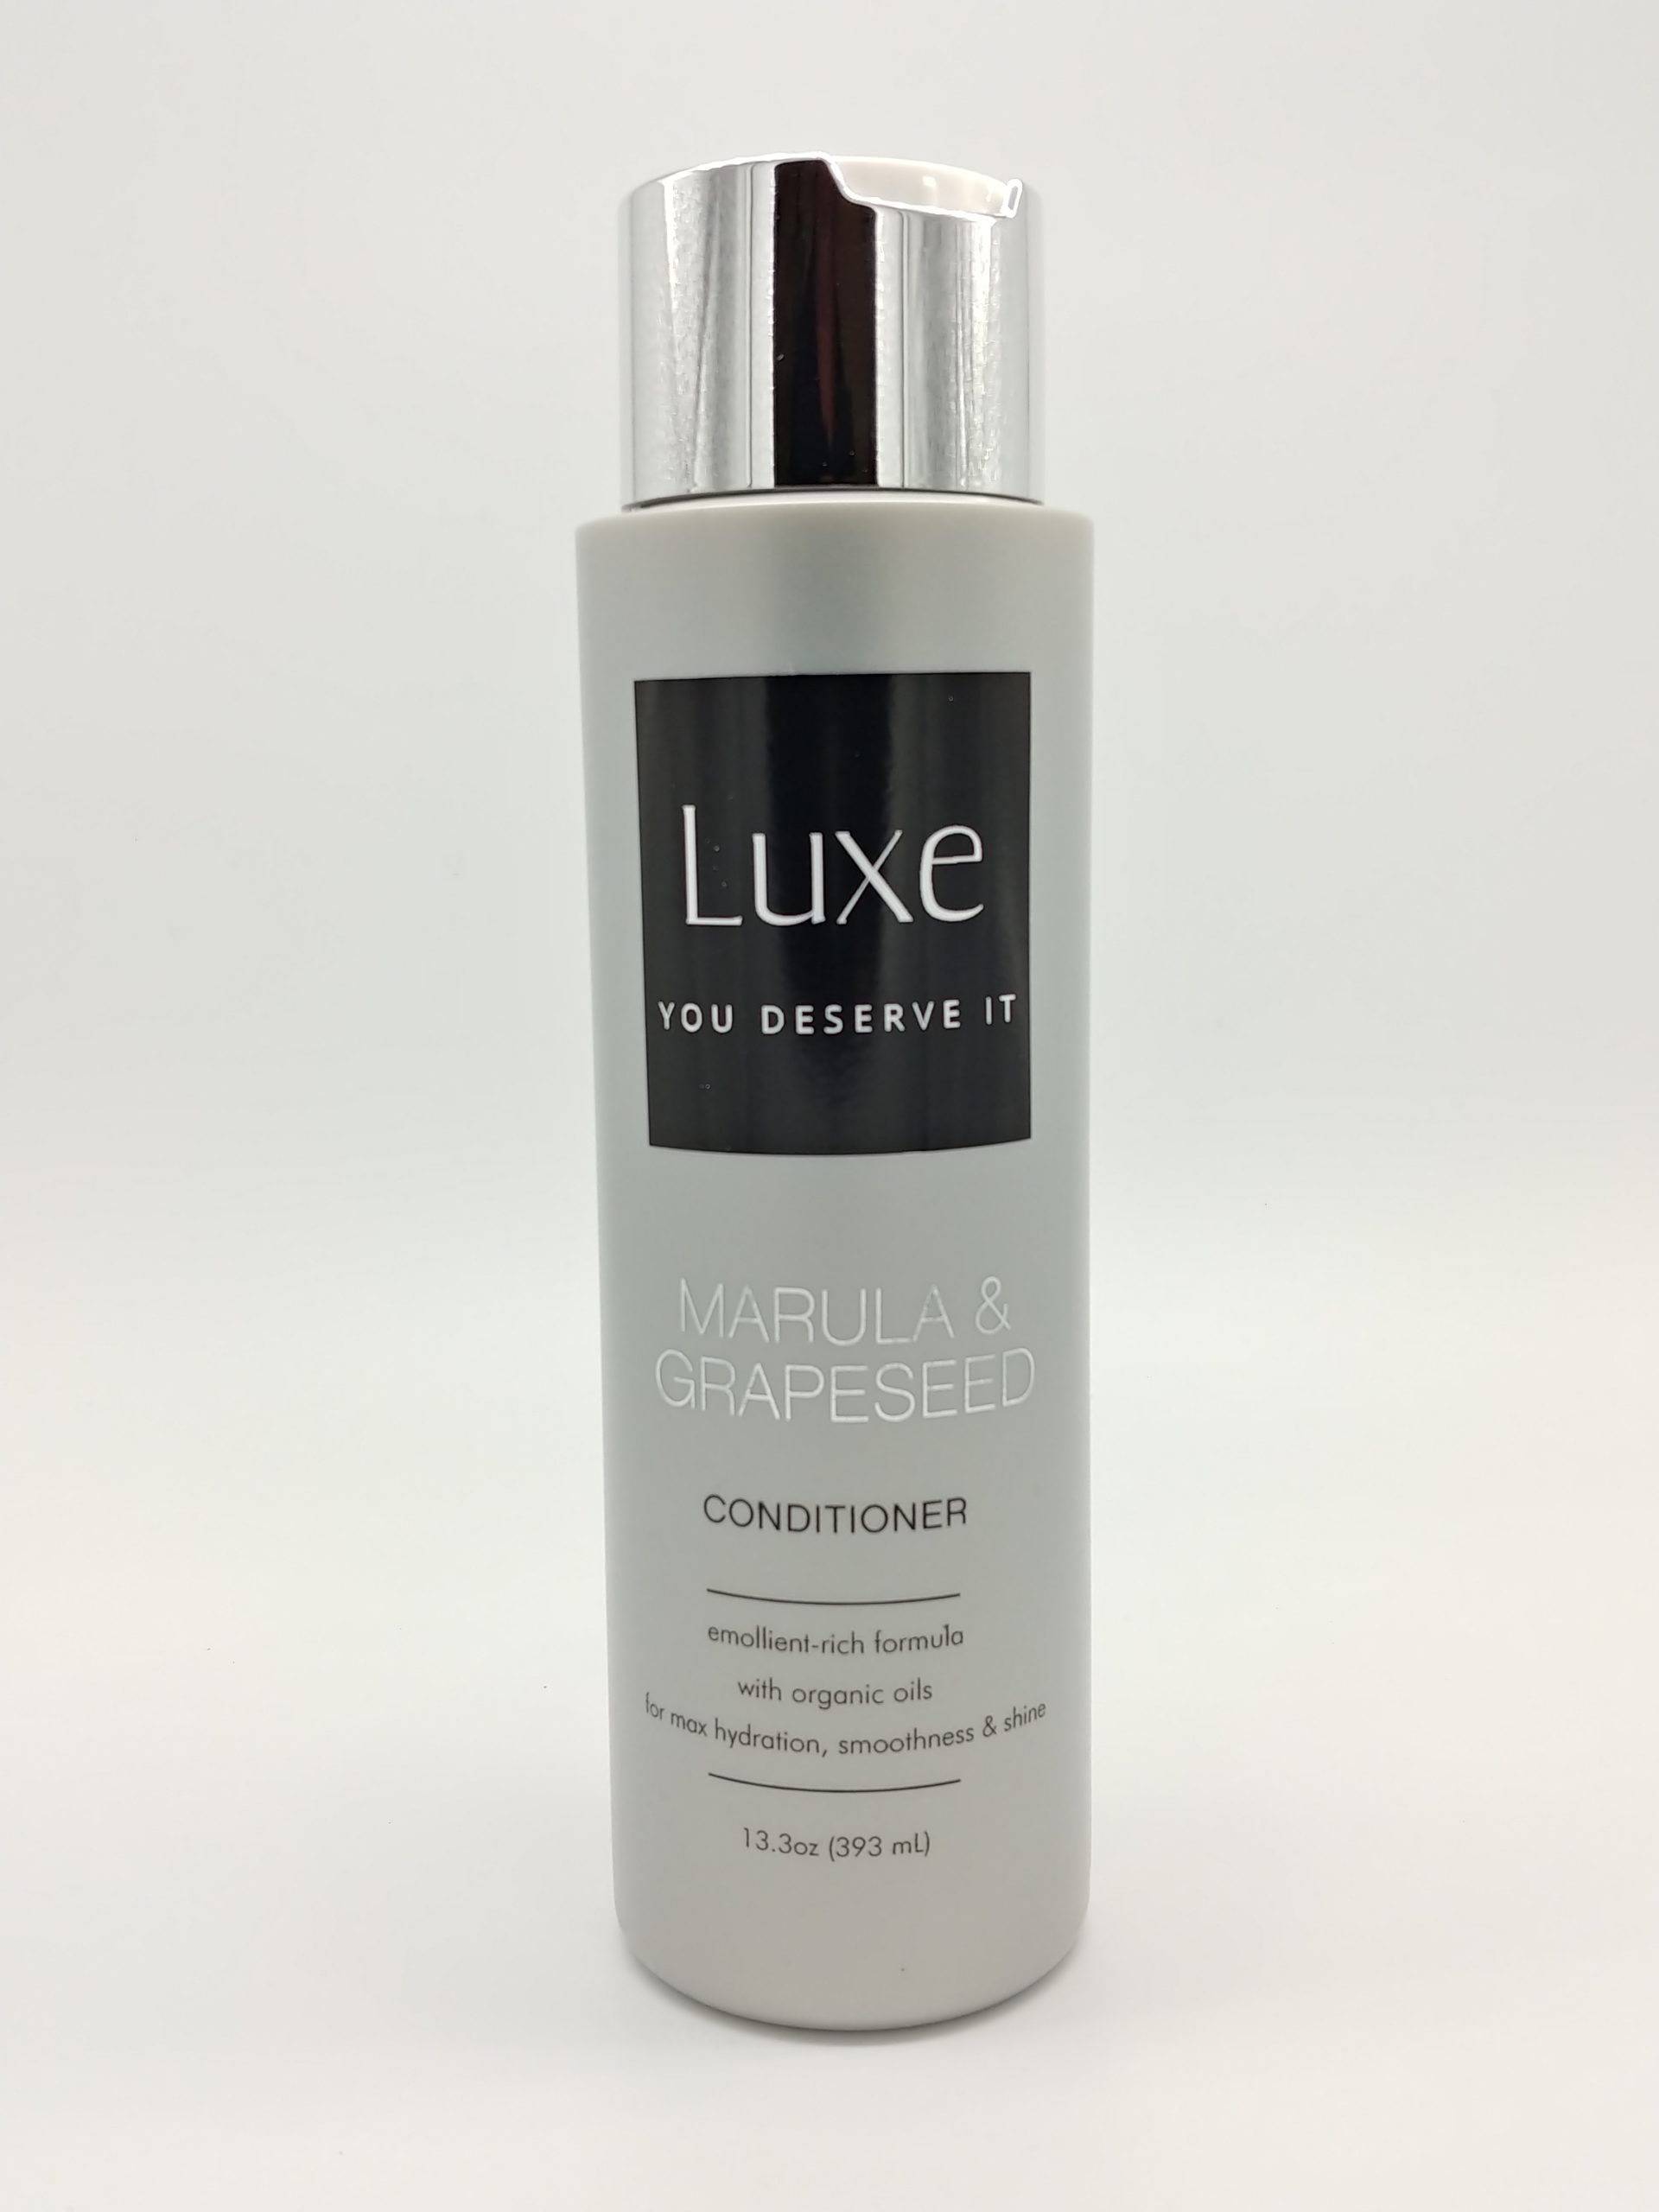 Luxe Marula & Grapeseed Conditioner